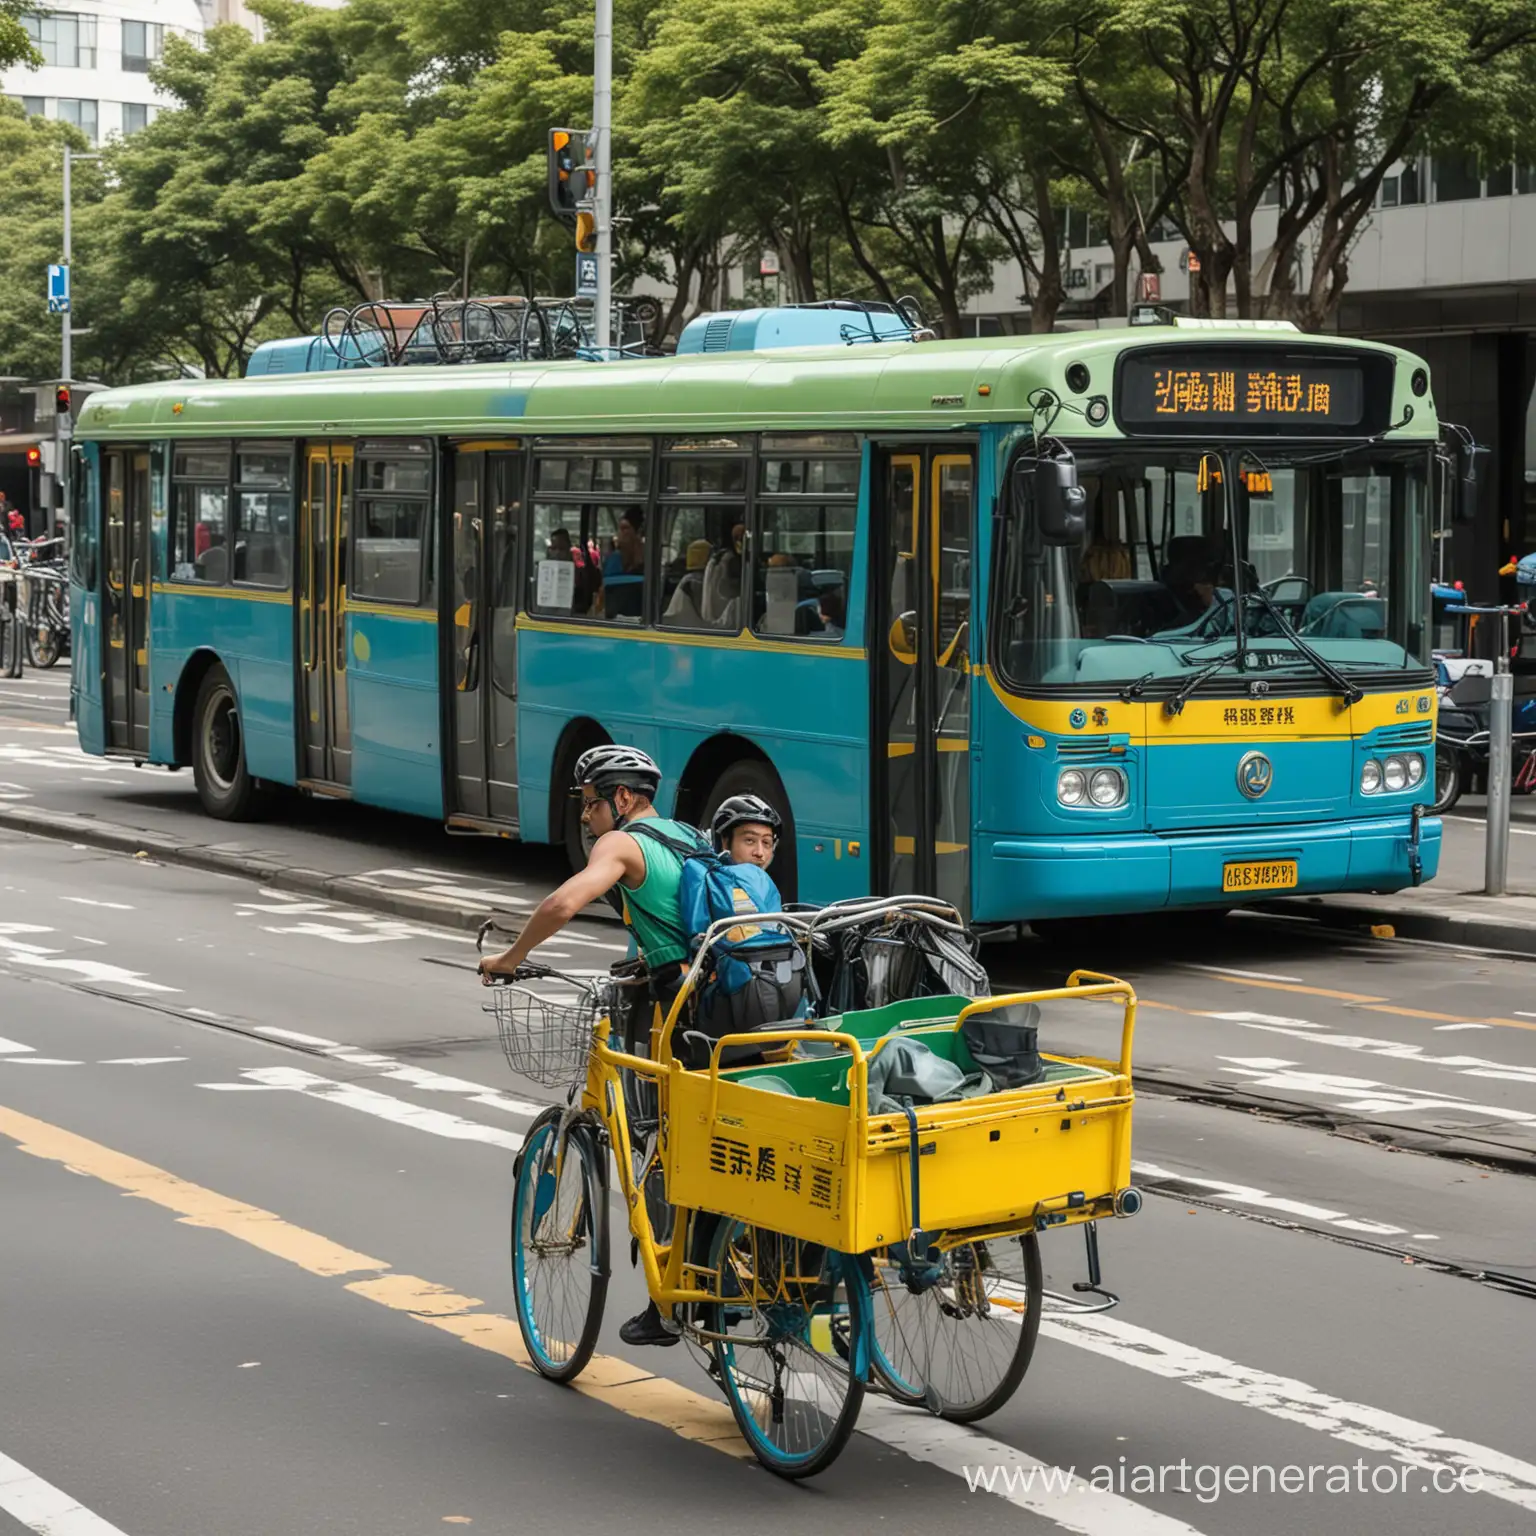 : A blue and green bus with a bike rack on the front, a yellow tram, and a cyclist with good asian face wearing a helmet. 